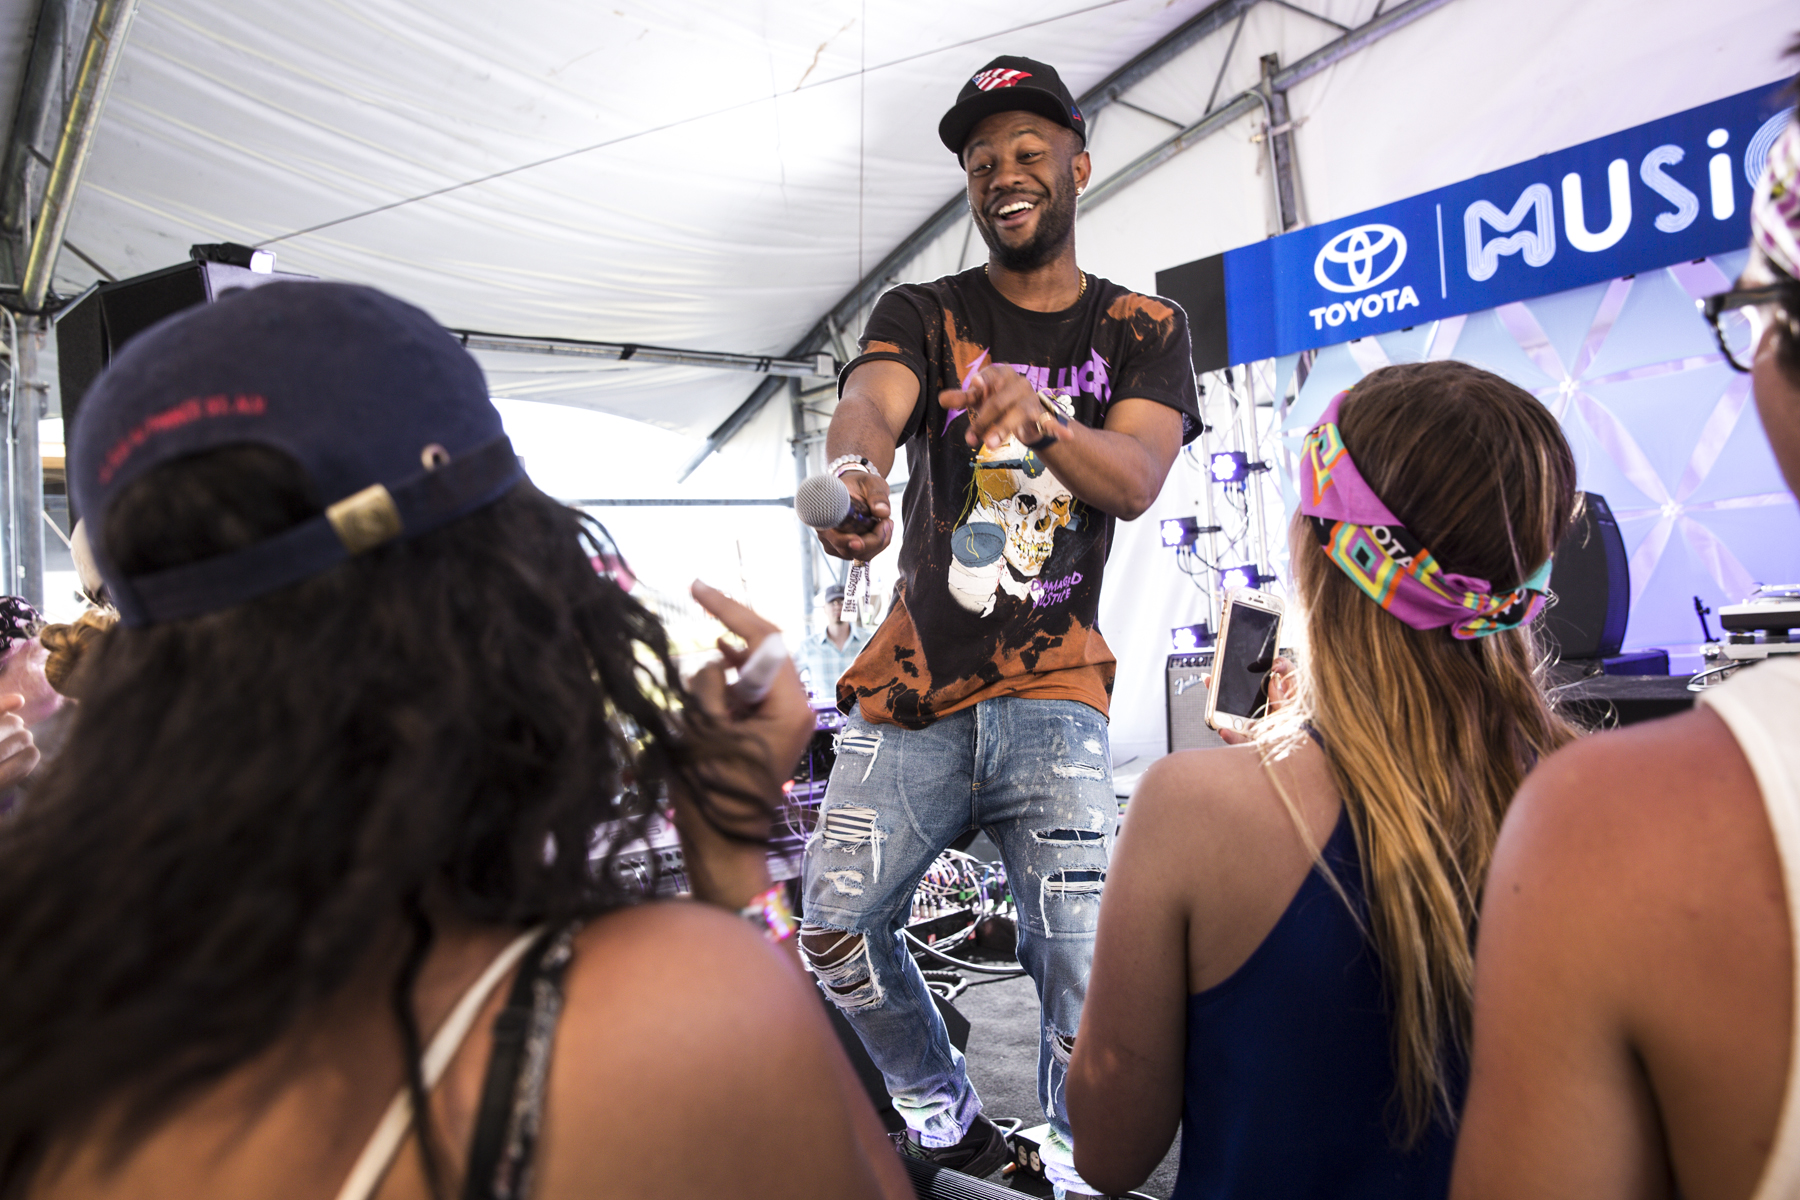 Sasquatch! 2016: Day 3 at Toyota Music Den with Casey Veggies, Wet, and More